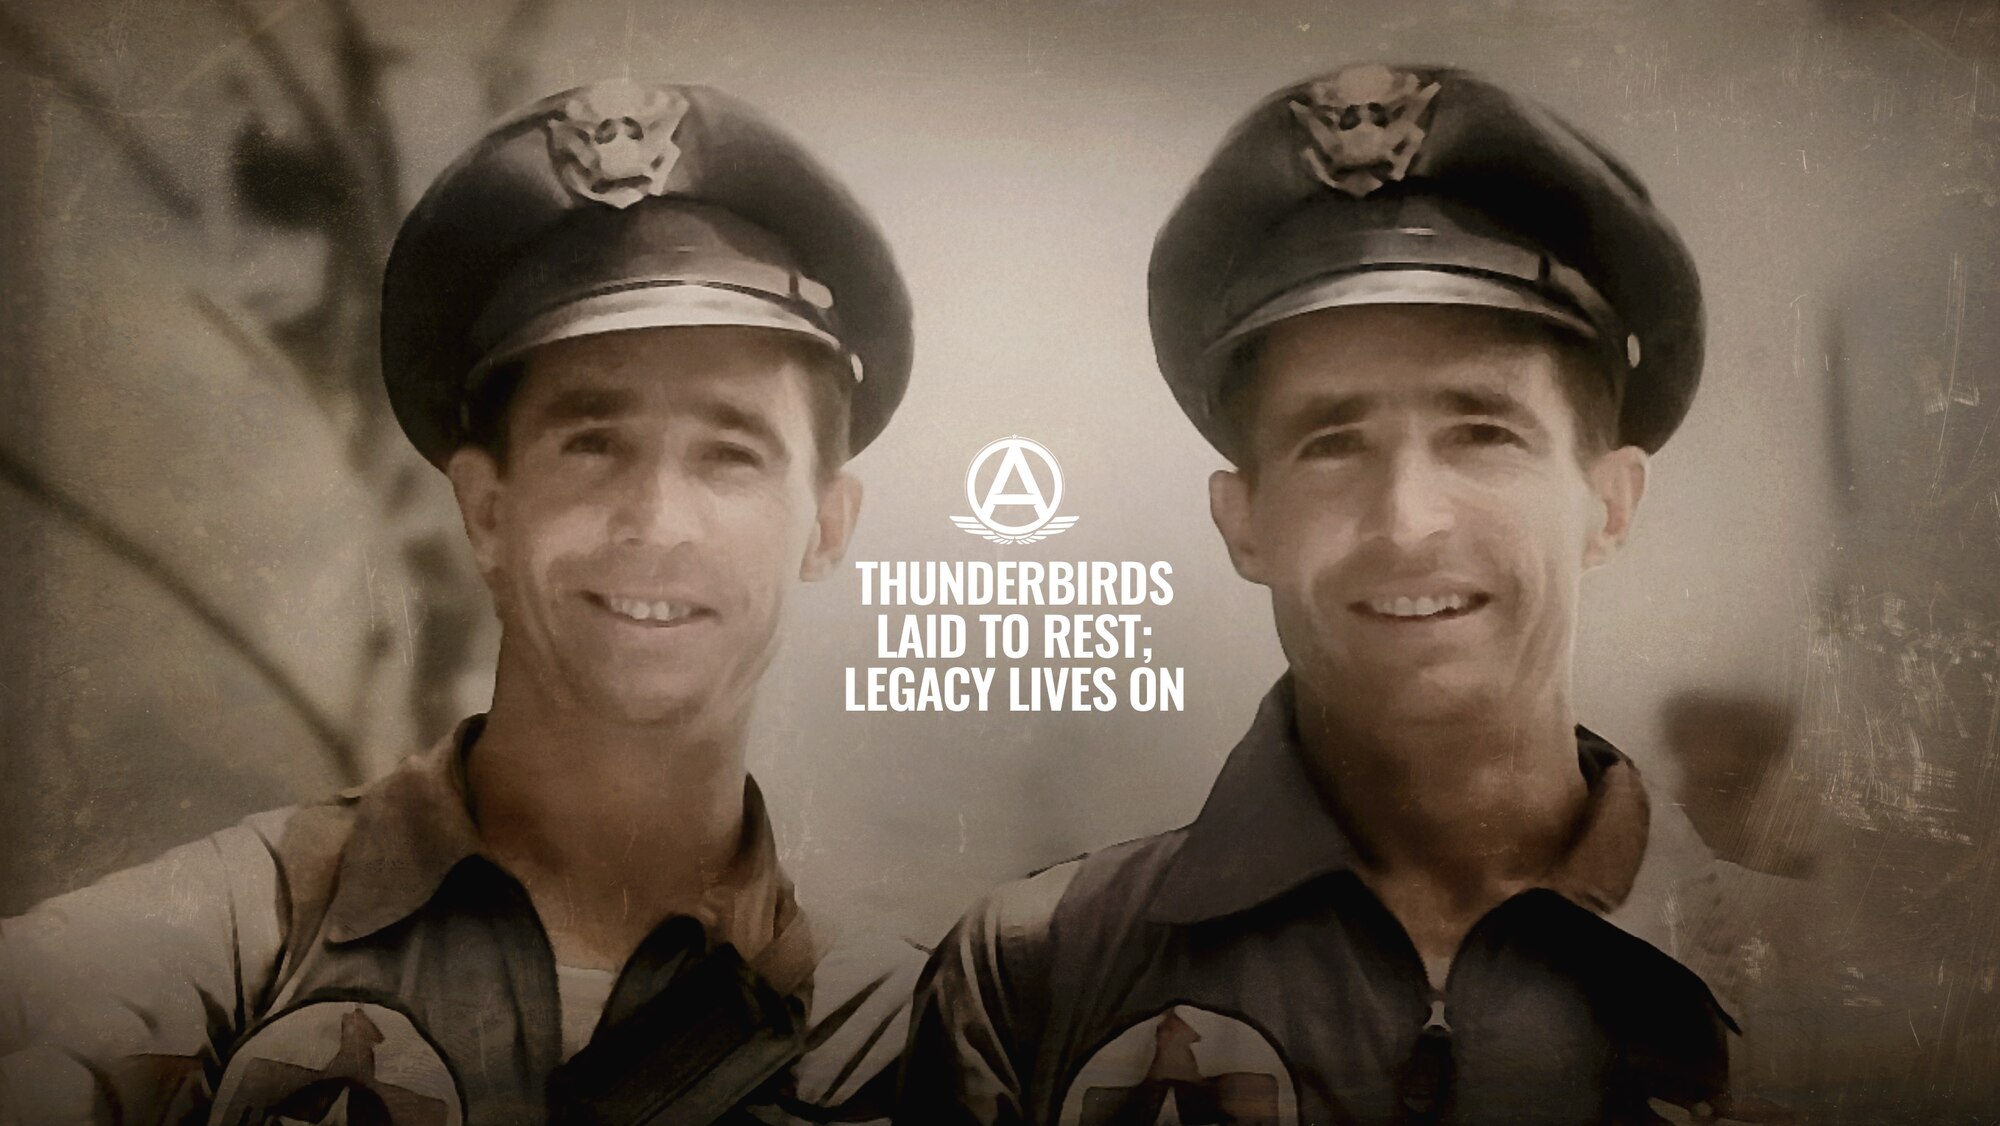 Thunderbirds Laid To Rest; Legacy Lives On